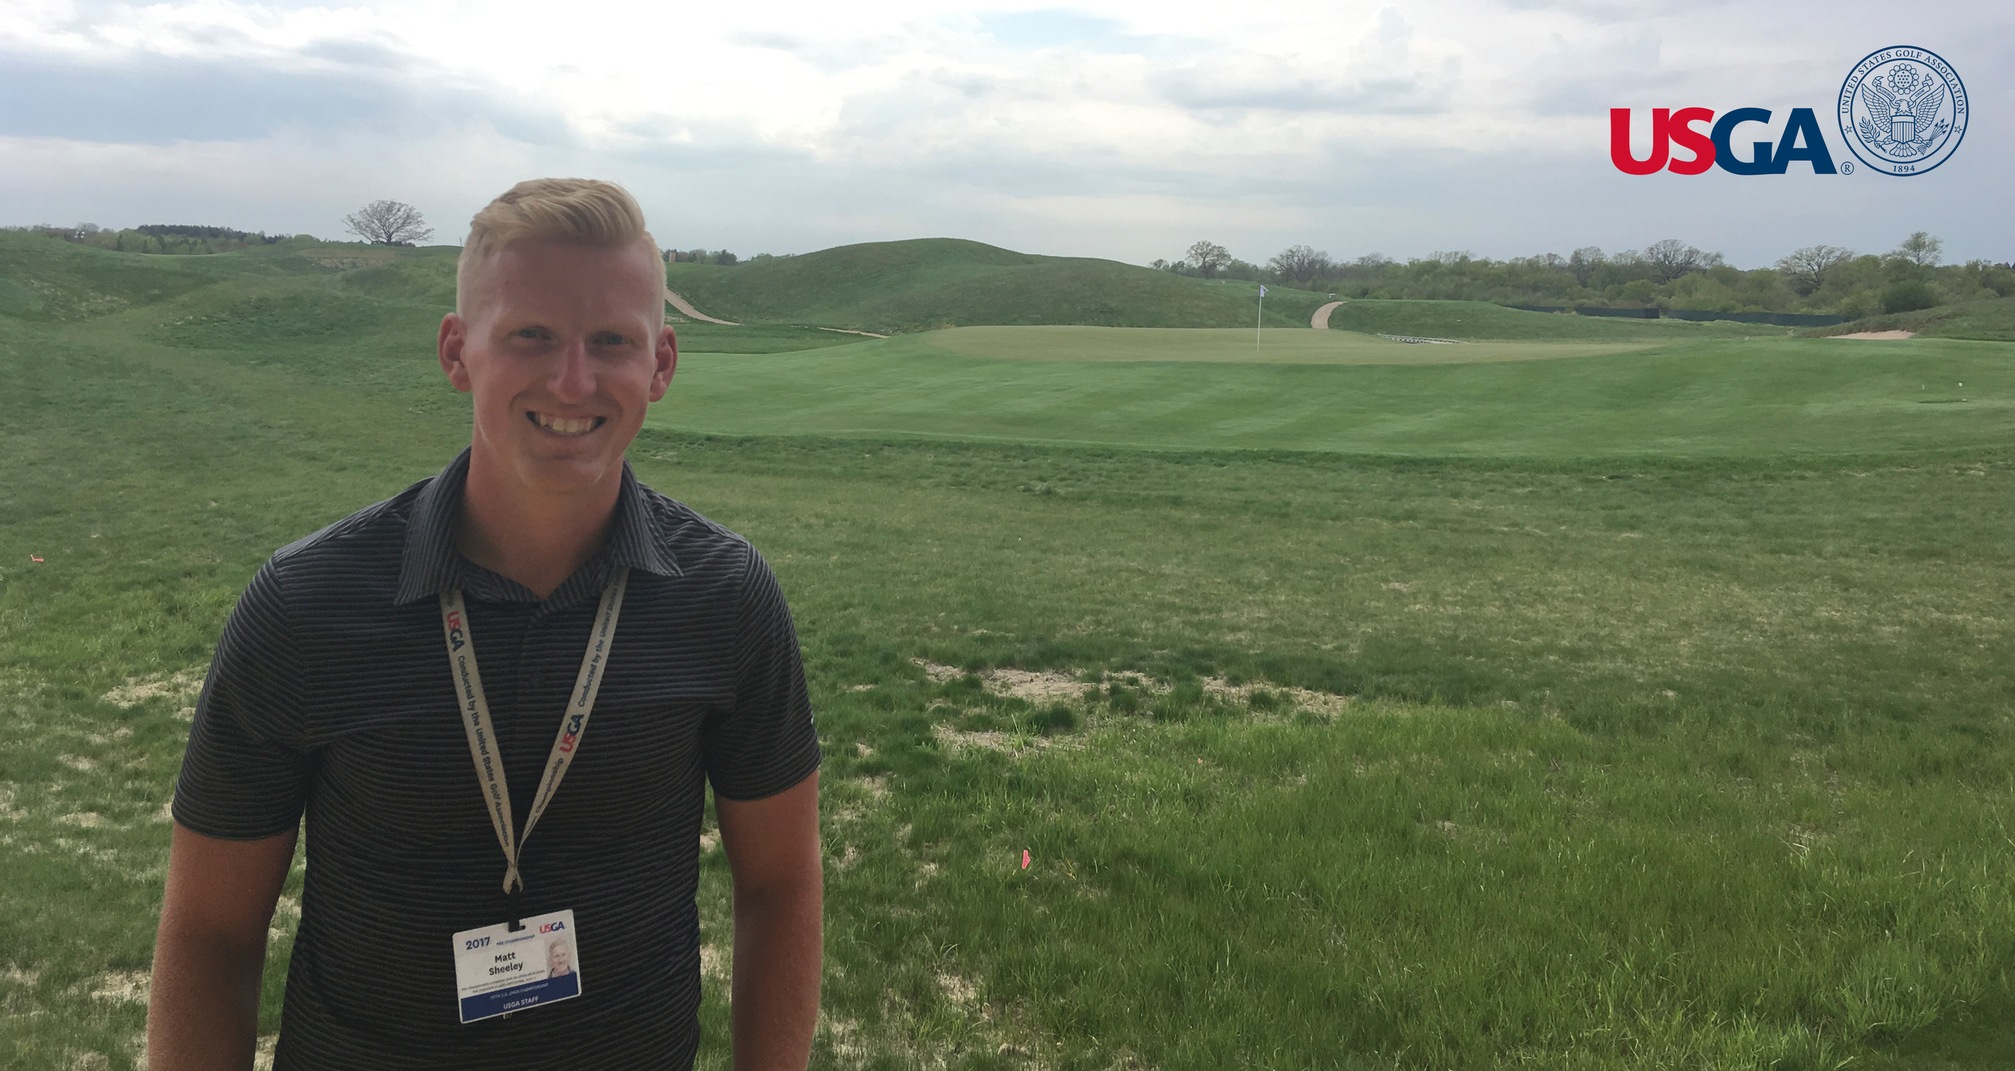 Sheeley (pictured) in front of the 13th green at Erin Hills, site of the 117th U.S. Open Championship.